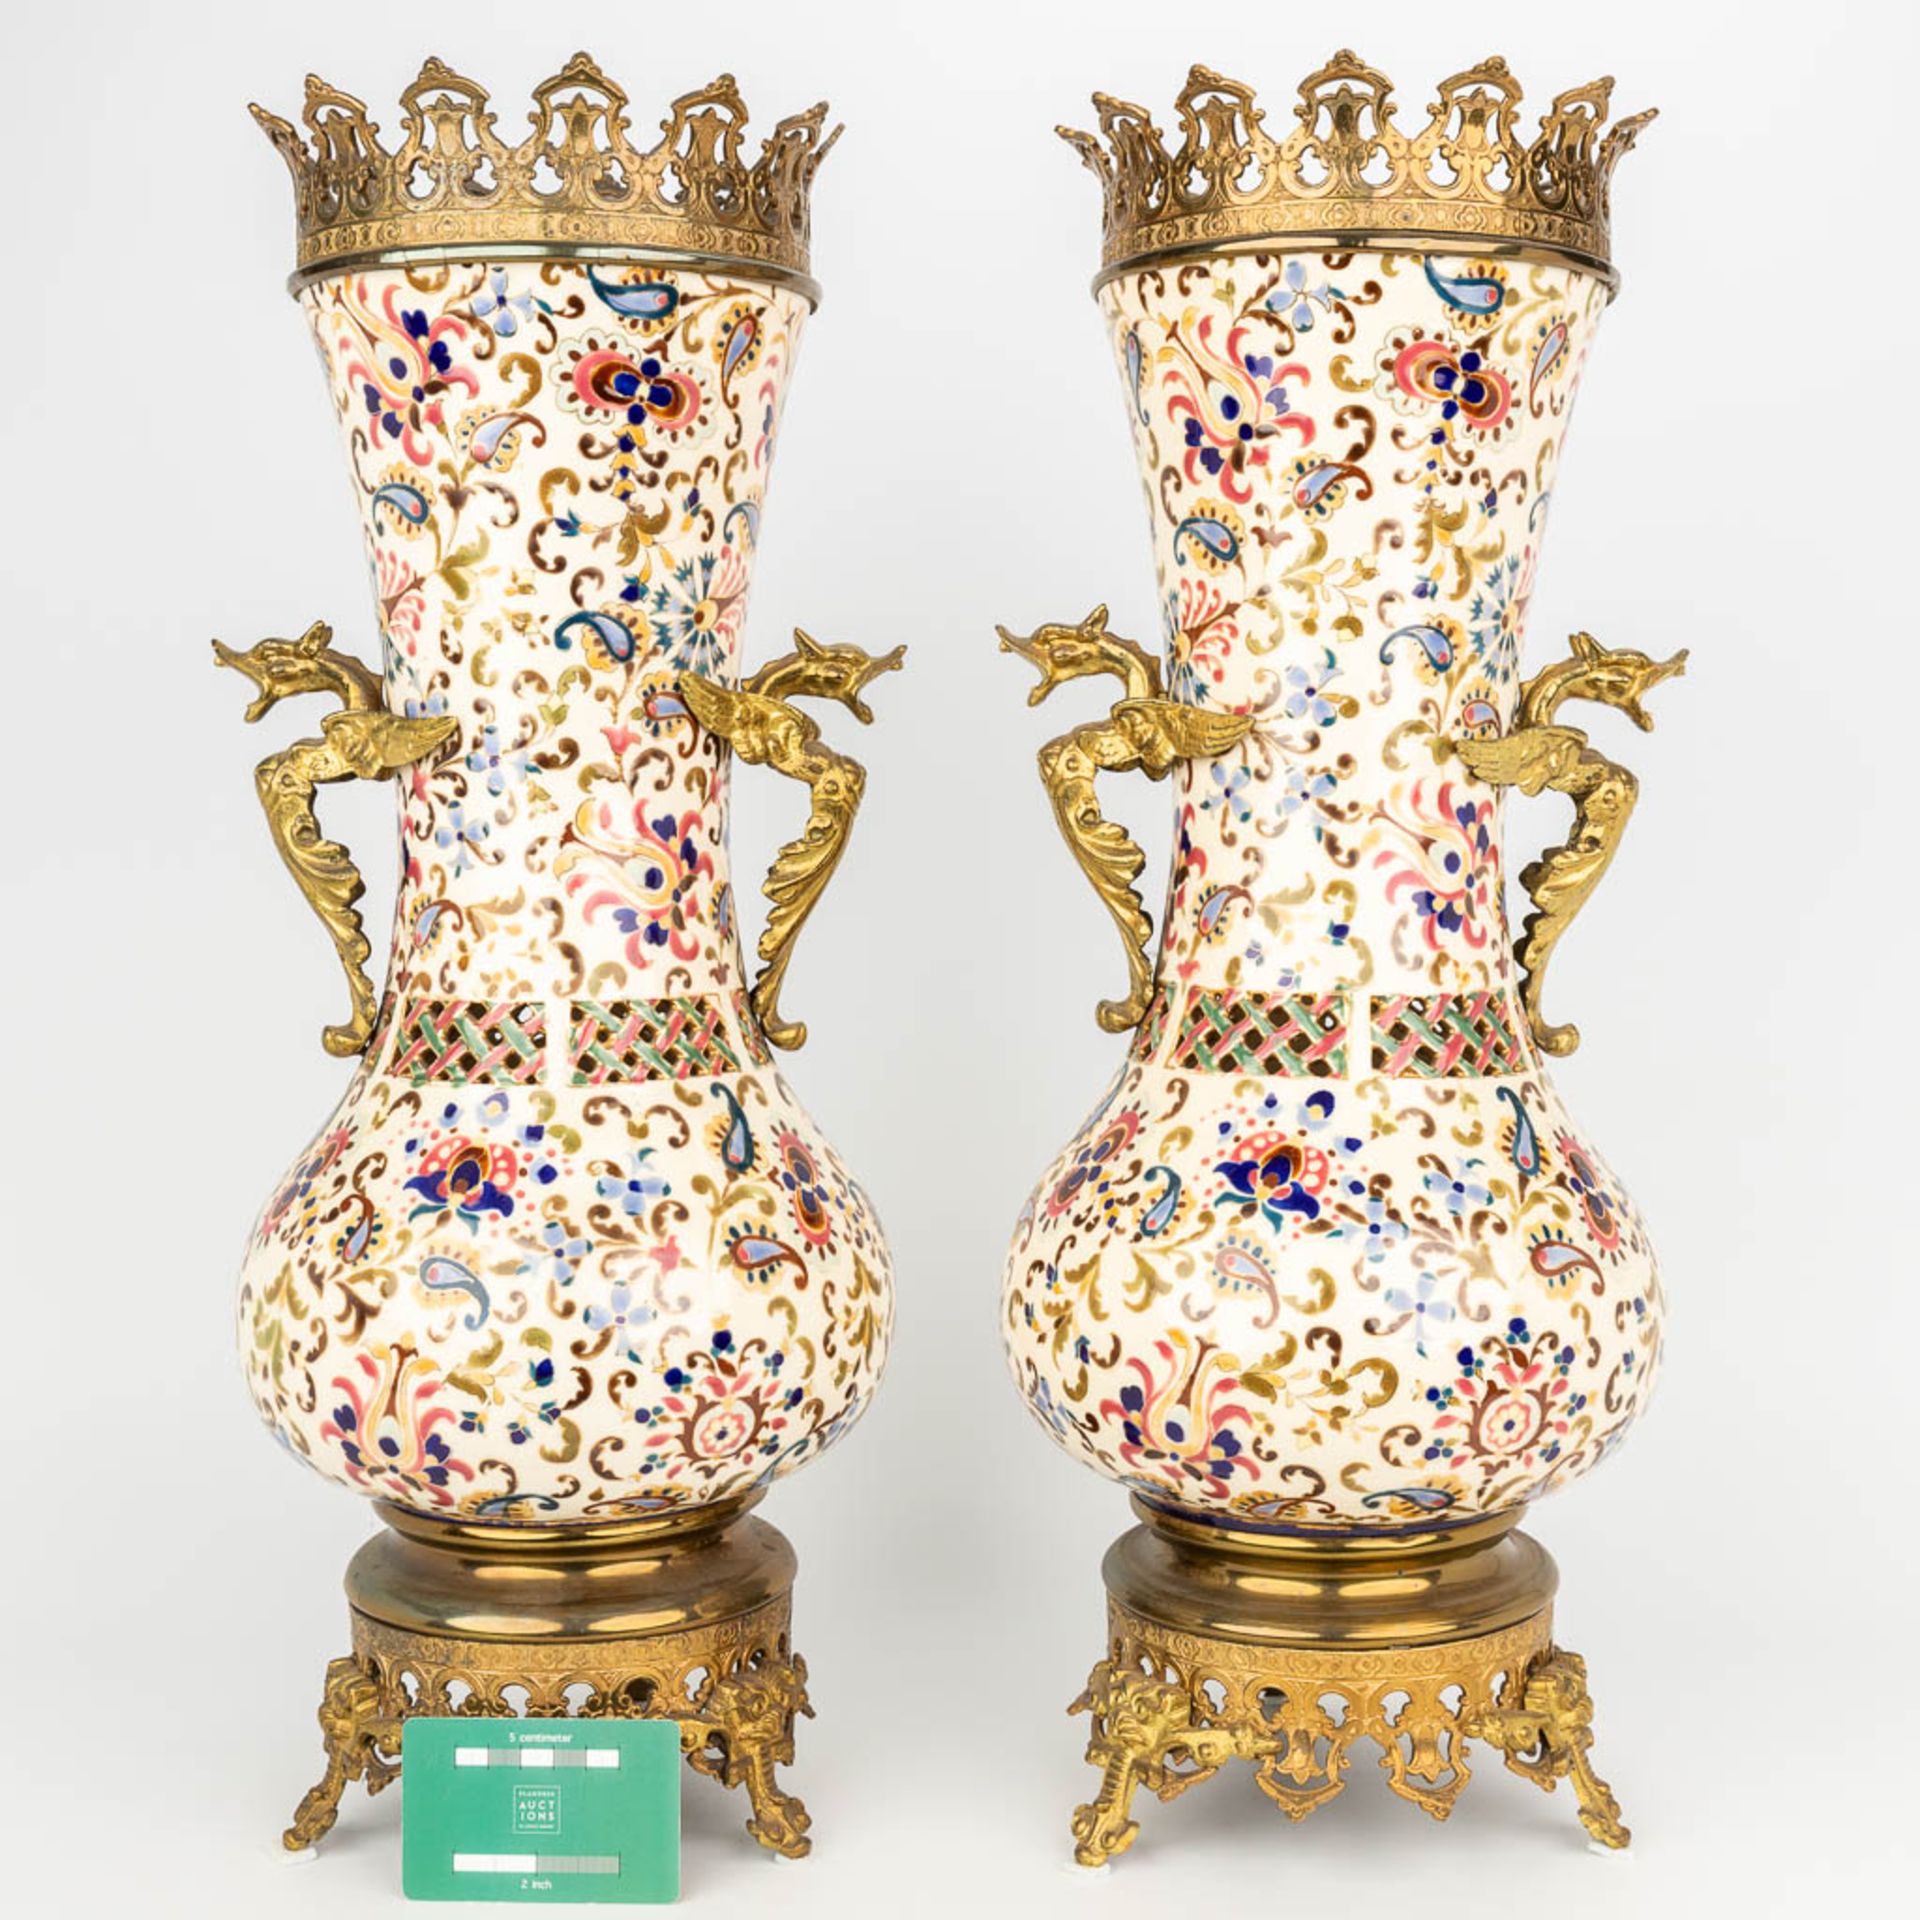 A pair of bronze mounted faience vases marked J. Fischer Budapest, Hungary. (H:54cm) - Image 8 of 12